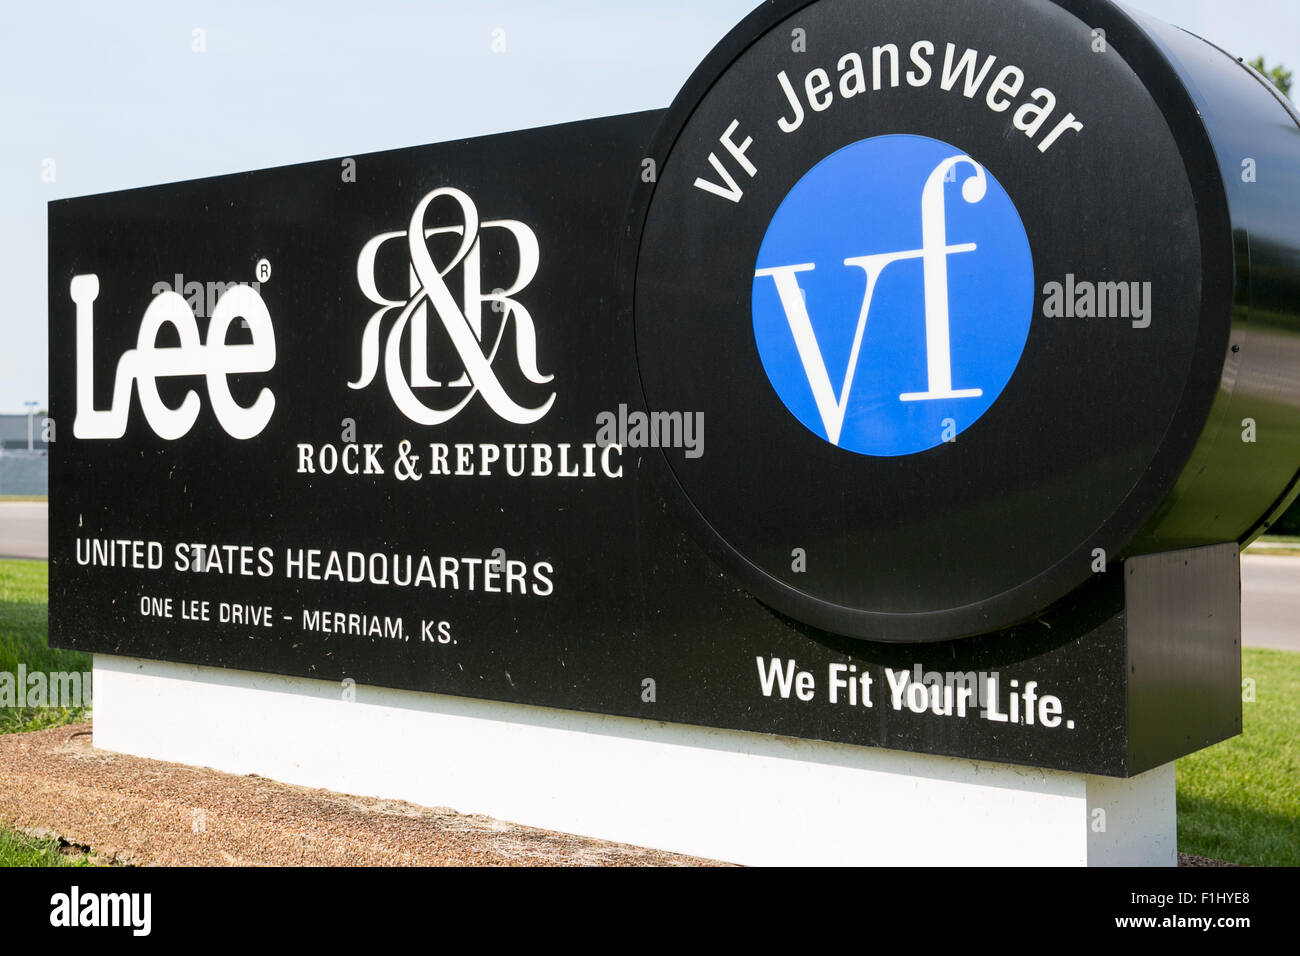 A logo sign outside the headquarters of Lee Jeans, a division of the VF Corporation in Merriam, Kansas on August 23, 2015. Stock Photo